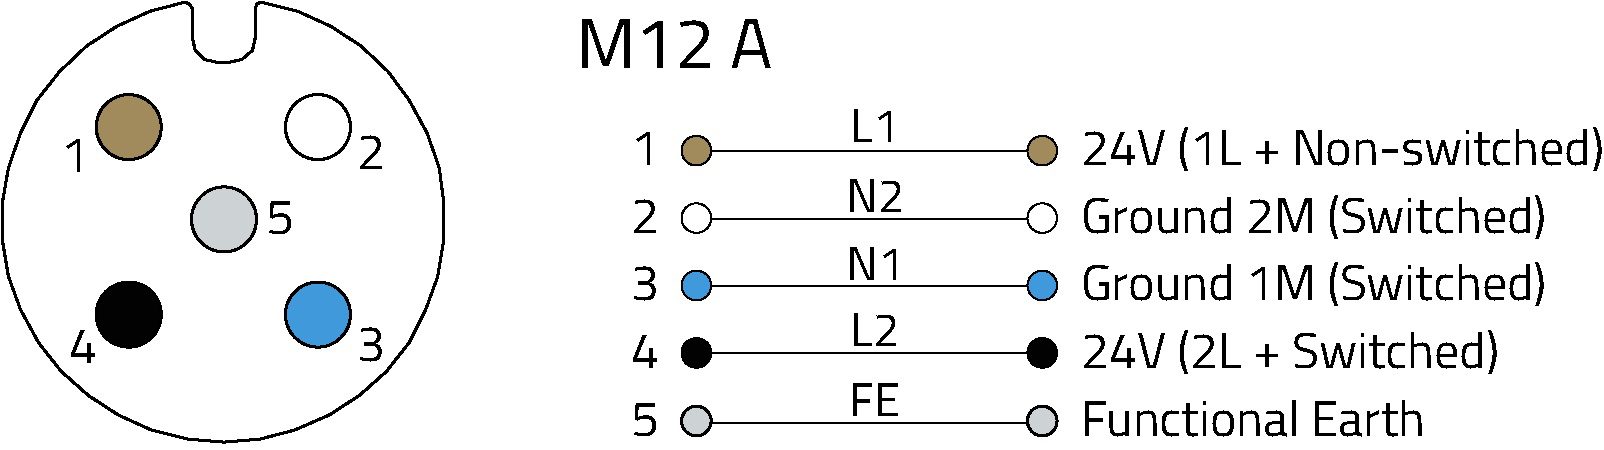 Pin assignment of a 5-pin M12-A coded socket used to power Profibus peripheral devices.